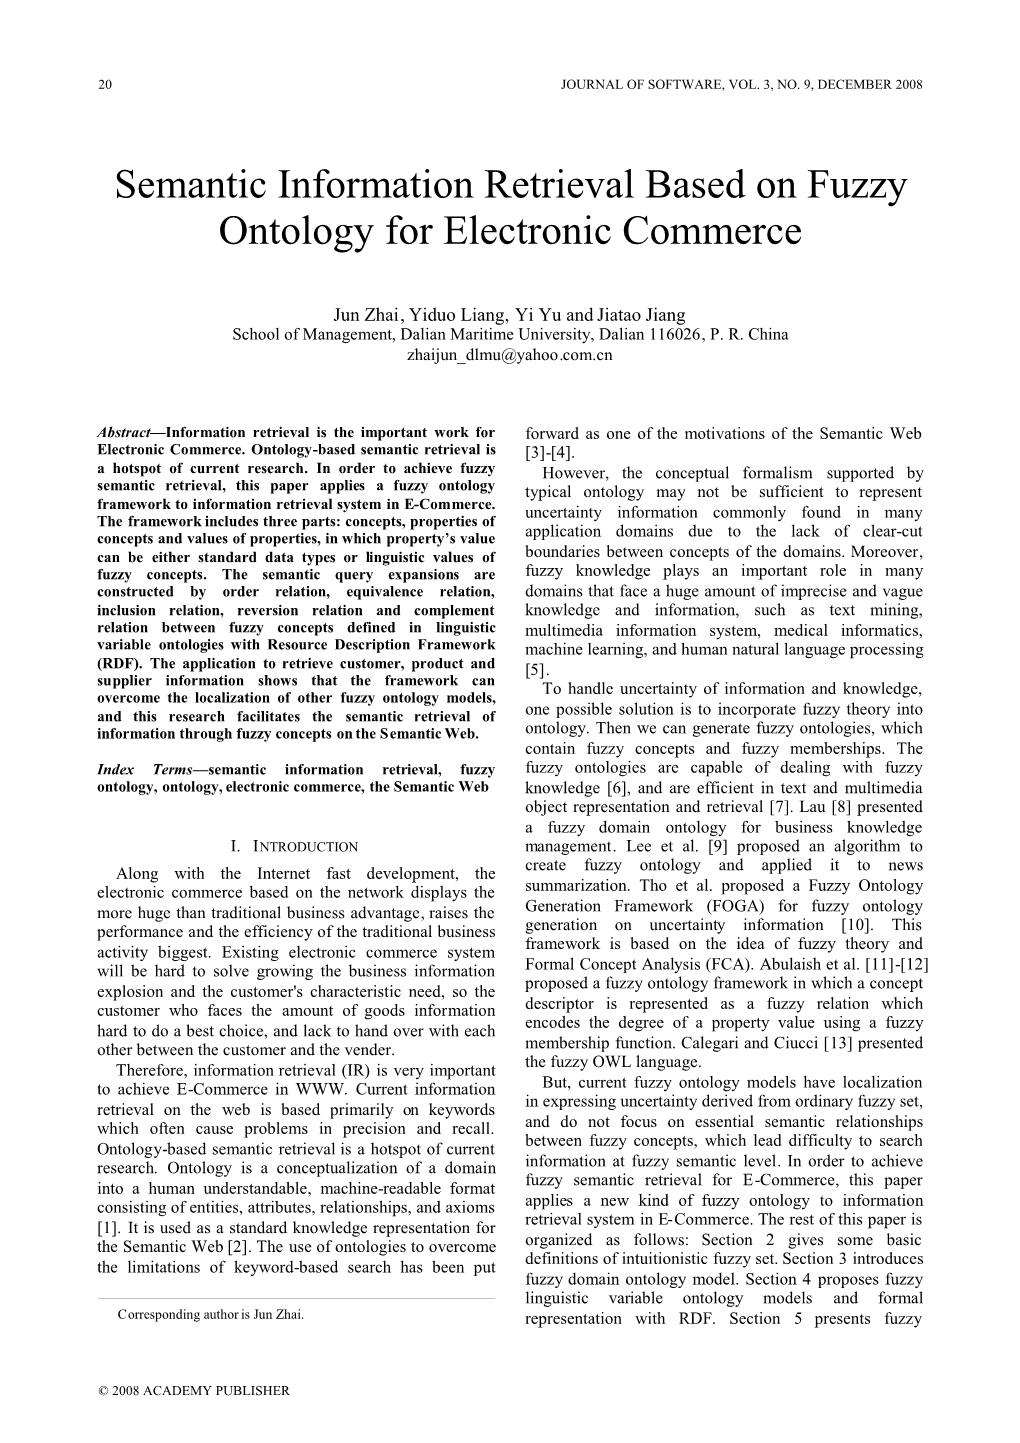 Semantic Information Retrieval Based on Fuzzy Ontology for Electronic Commerce